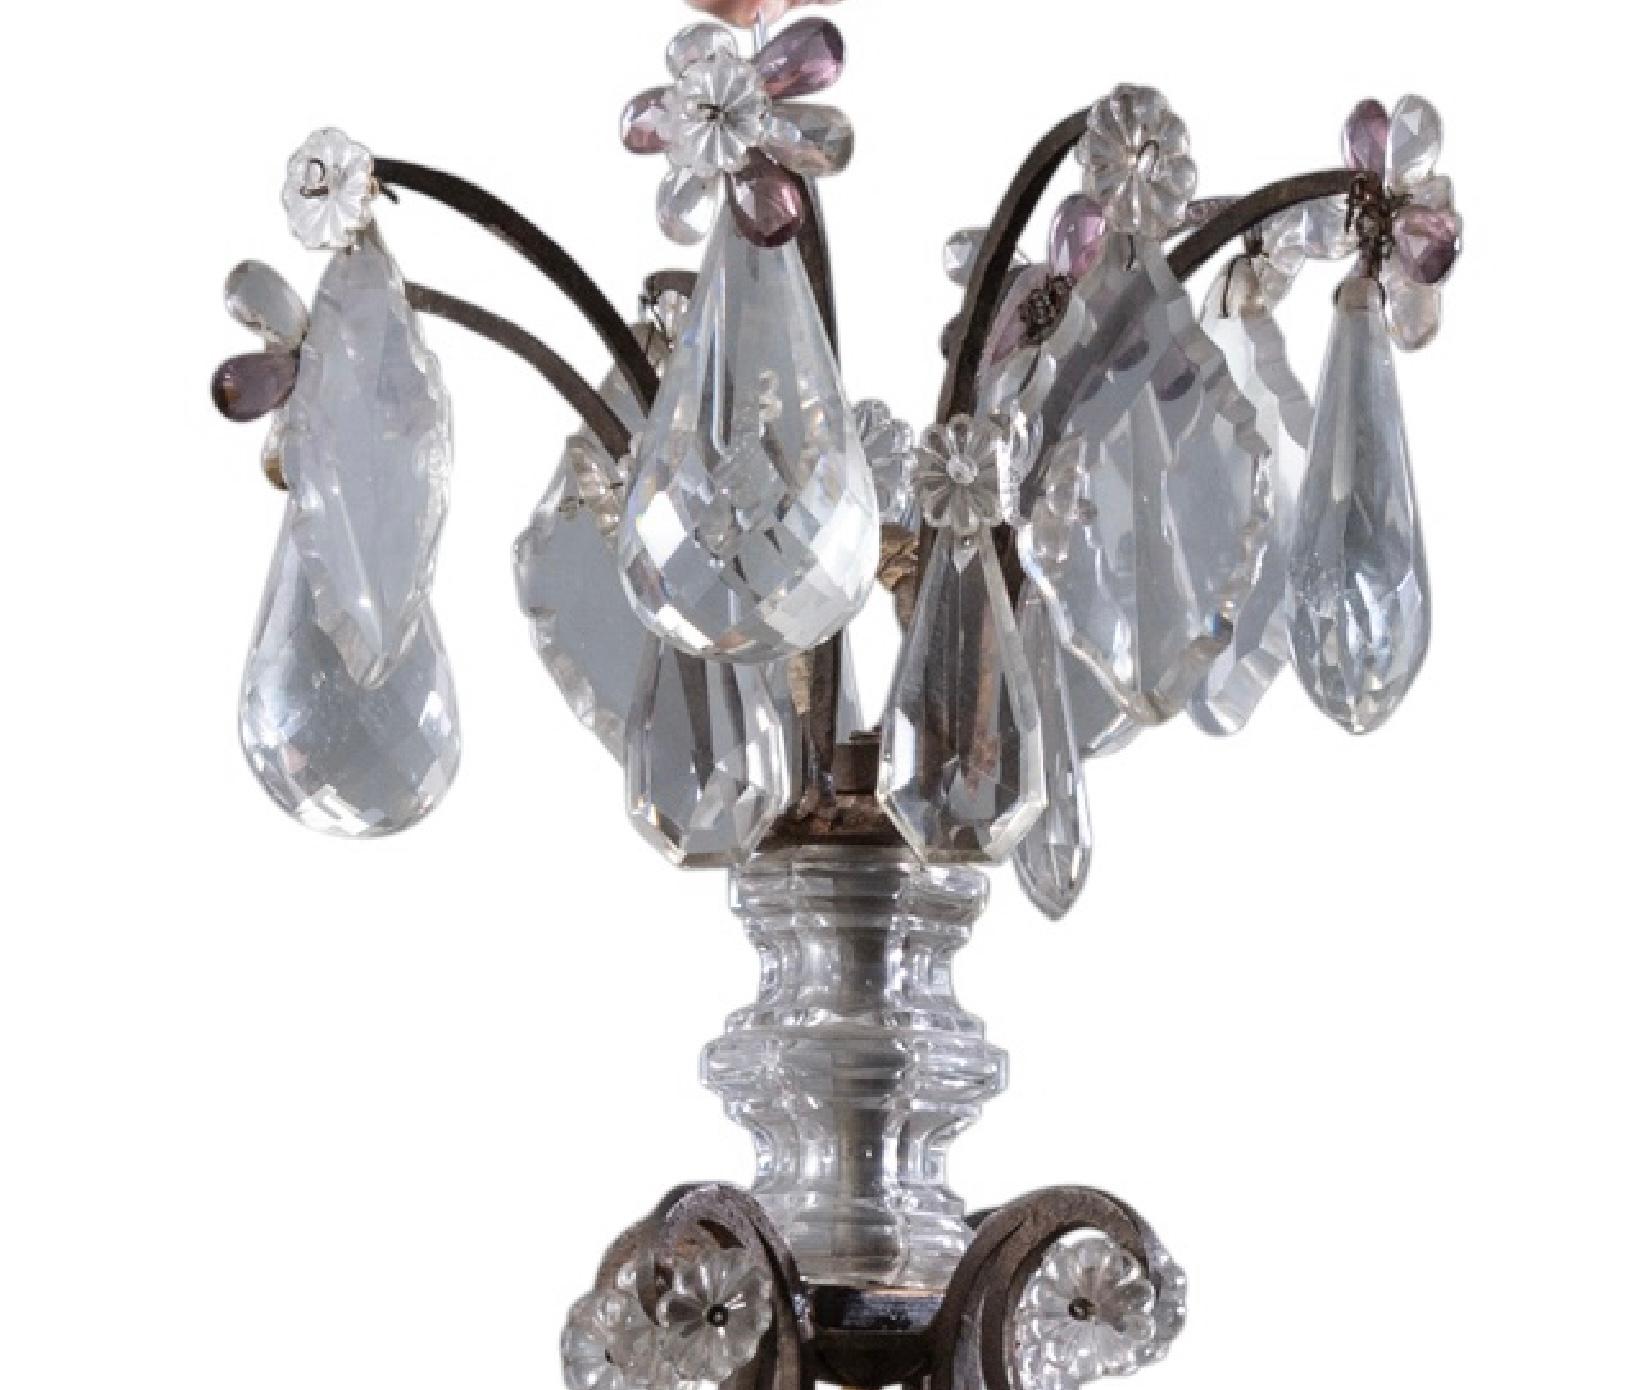 Large Louis XV style iron and cut glass eight light chandelier. Chandelier has colorless and amethyst glass pendant prisms. Wonderful old mellow patina. Perfect for any decor.
